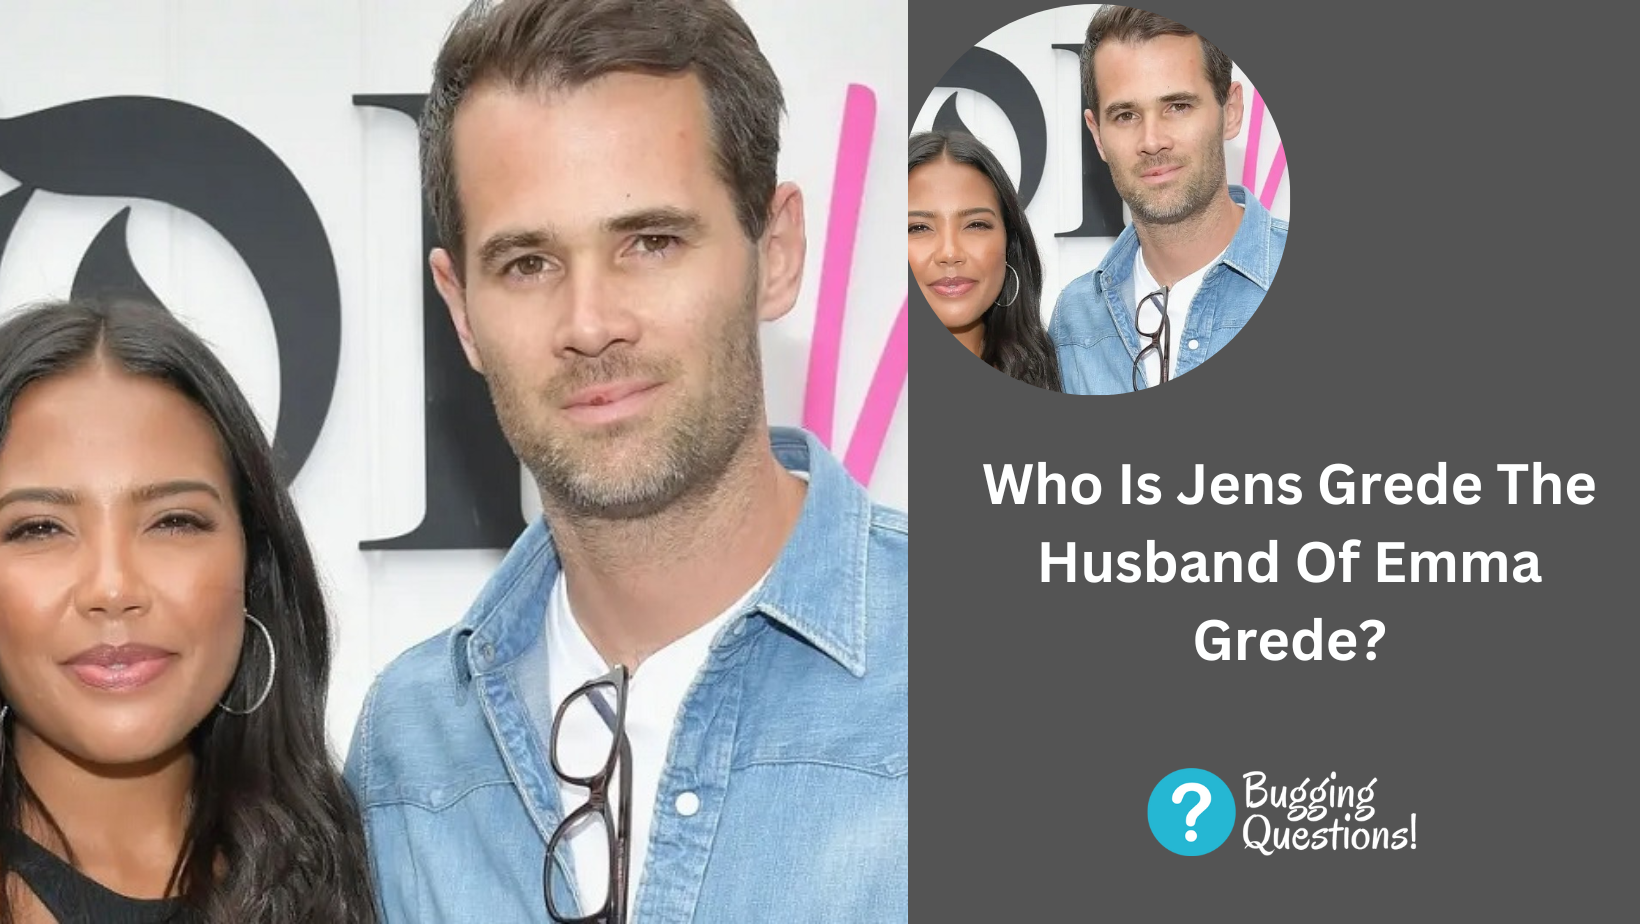 Who Is Jens Grede The Husband Of Emma Grede?